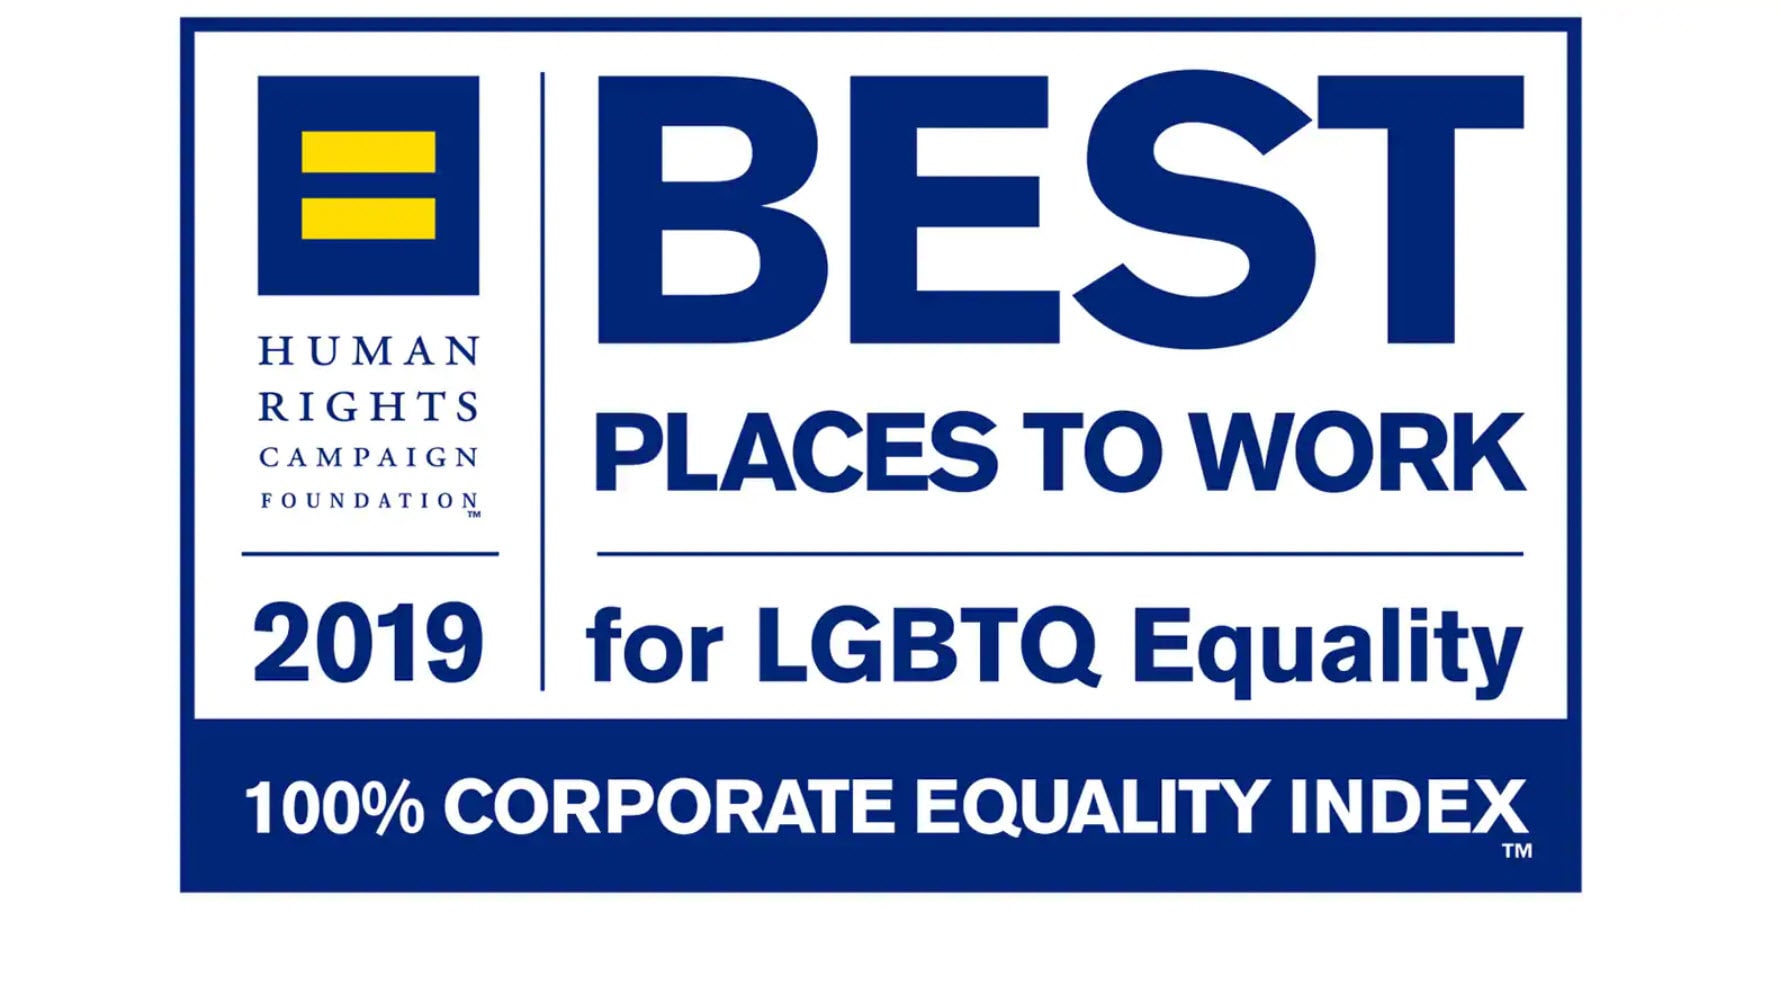 Best places to work for LGBTQ equality award logo